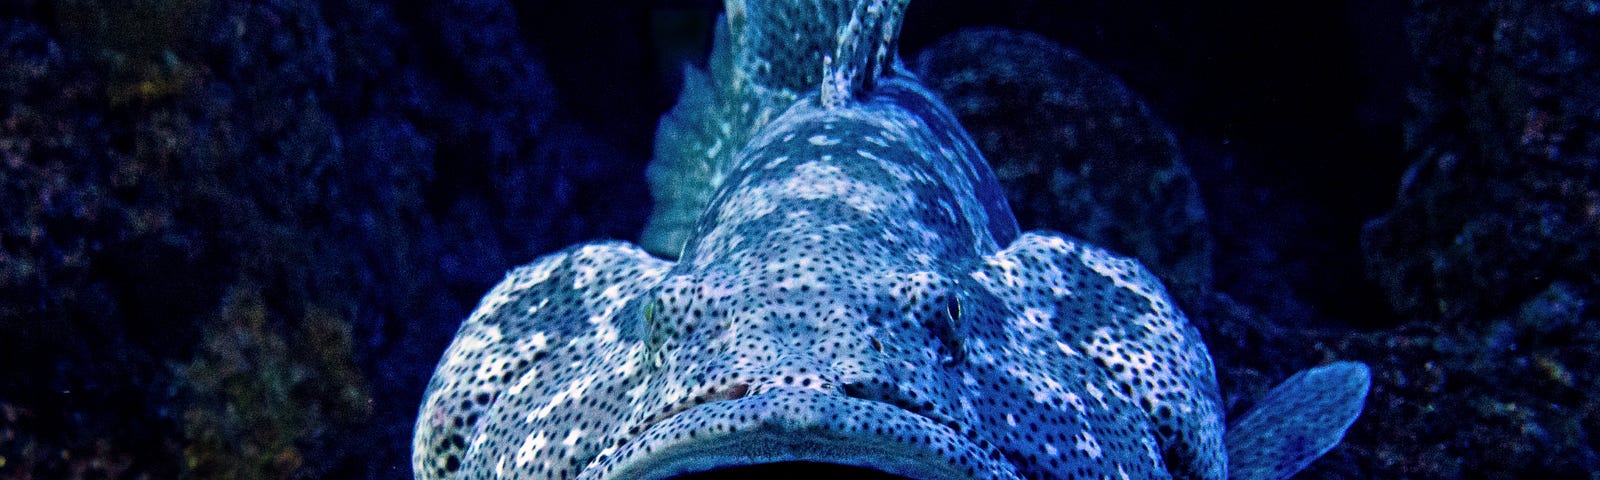 Head-on view of enormous variegated-blue fish with gaping mouth, presented on black background.